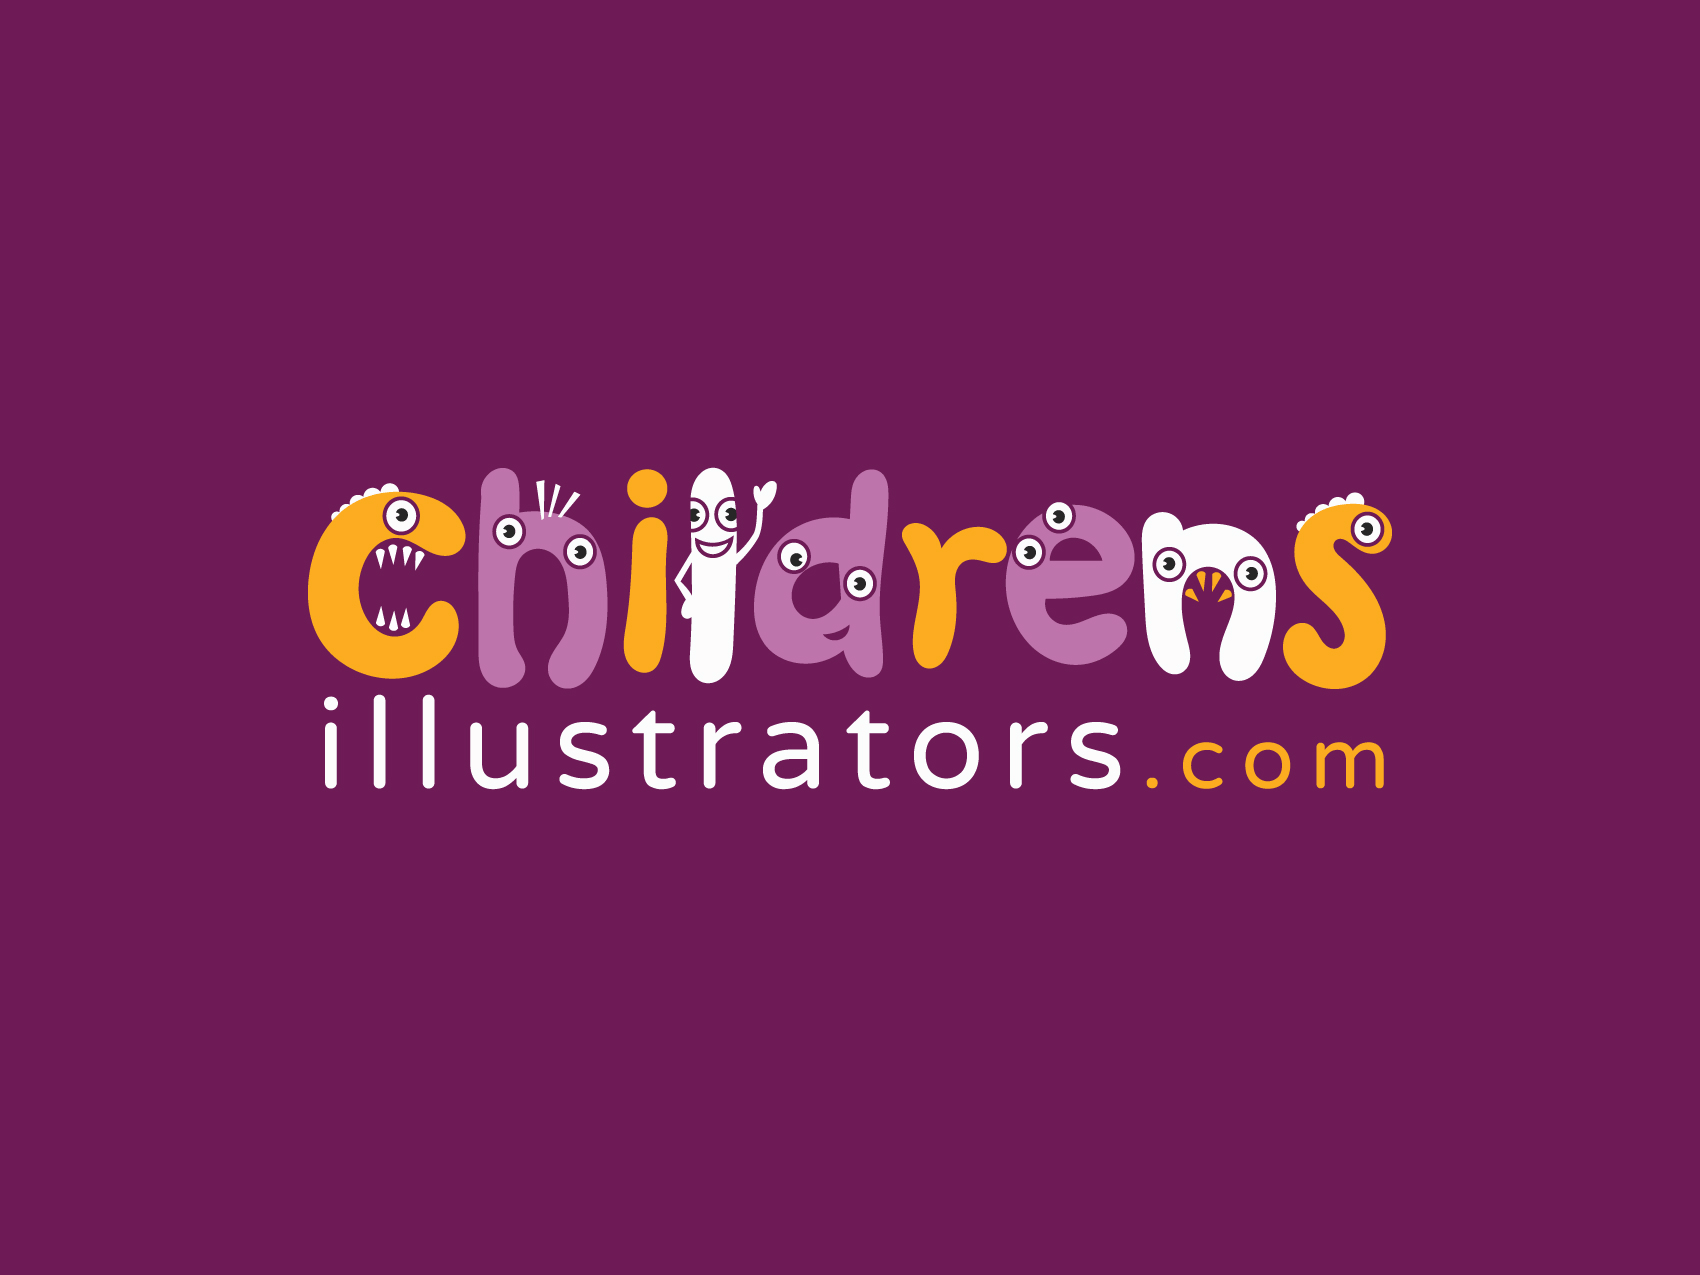 Association of Illustrators featured artists of the Month